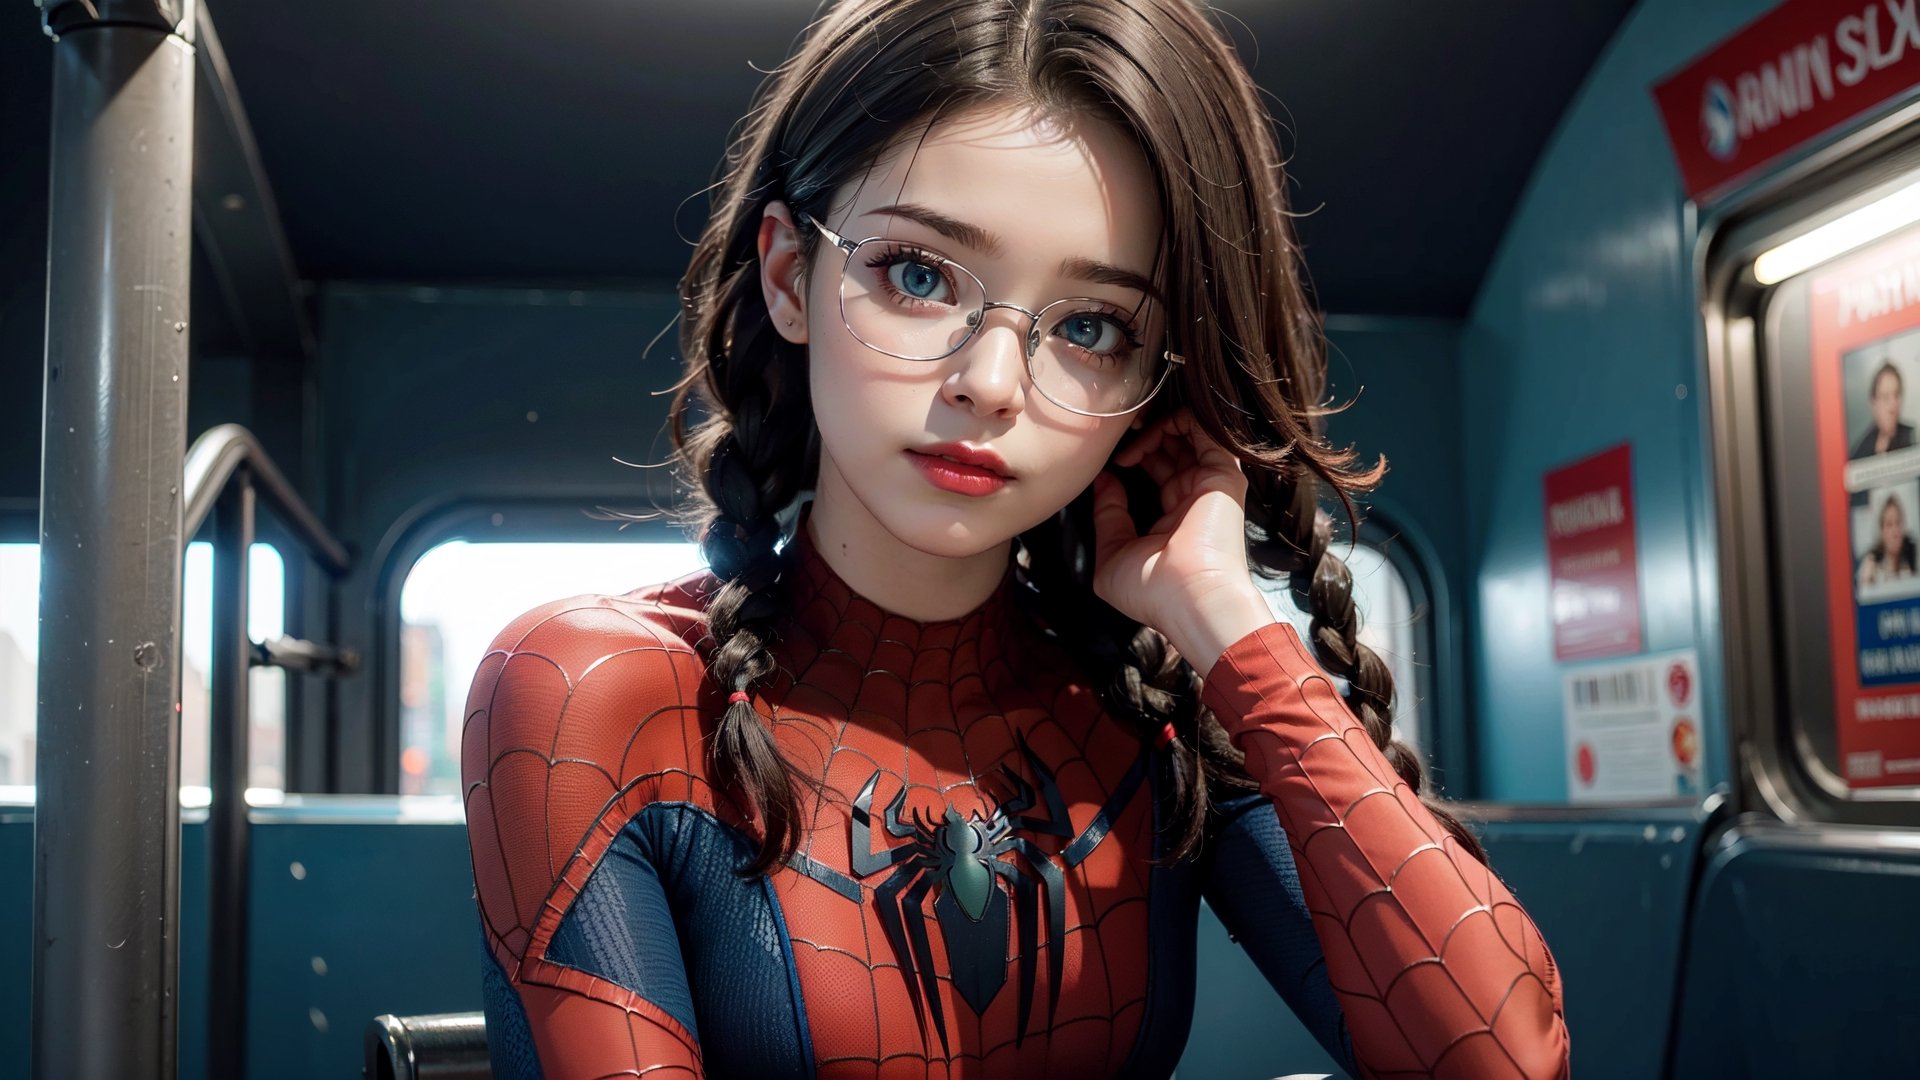 (masterpiece), best quality, high resolution, highly detailed, detailed background, perfect lighting,light blue eyes, medium breasts, The student council girl with glasses and twin braids sitting inside a new york city subway, posing,Makeup,spider-man costume,